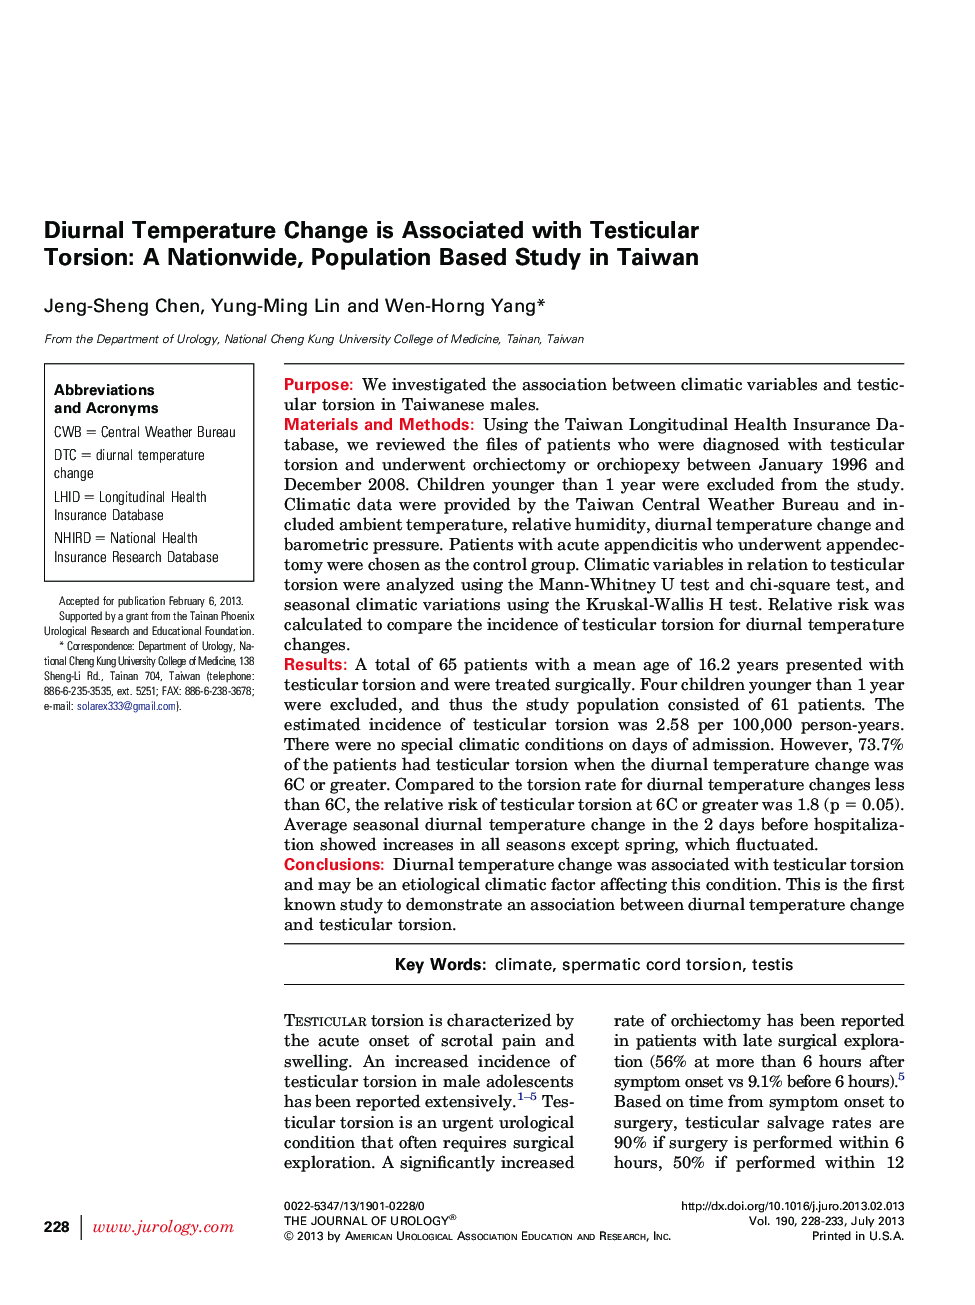 Diurnal Temperature Change is Associated with Testicular Torsion: A Nationwide, Population Based Study in Taiwan